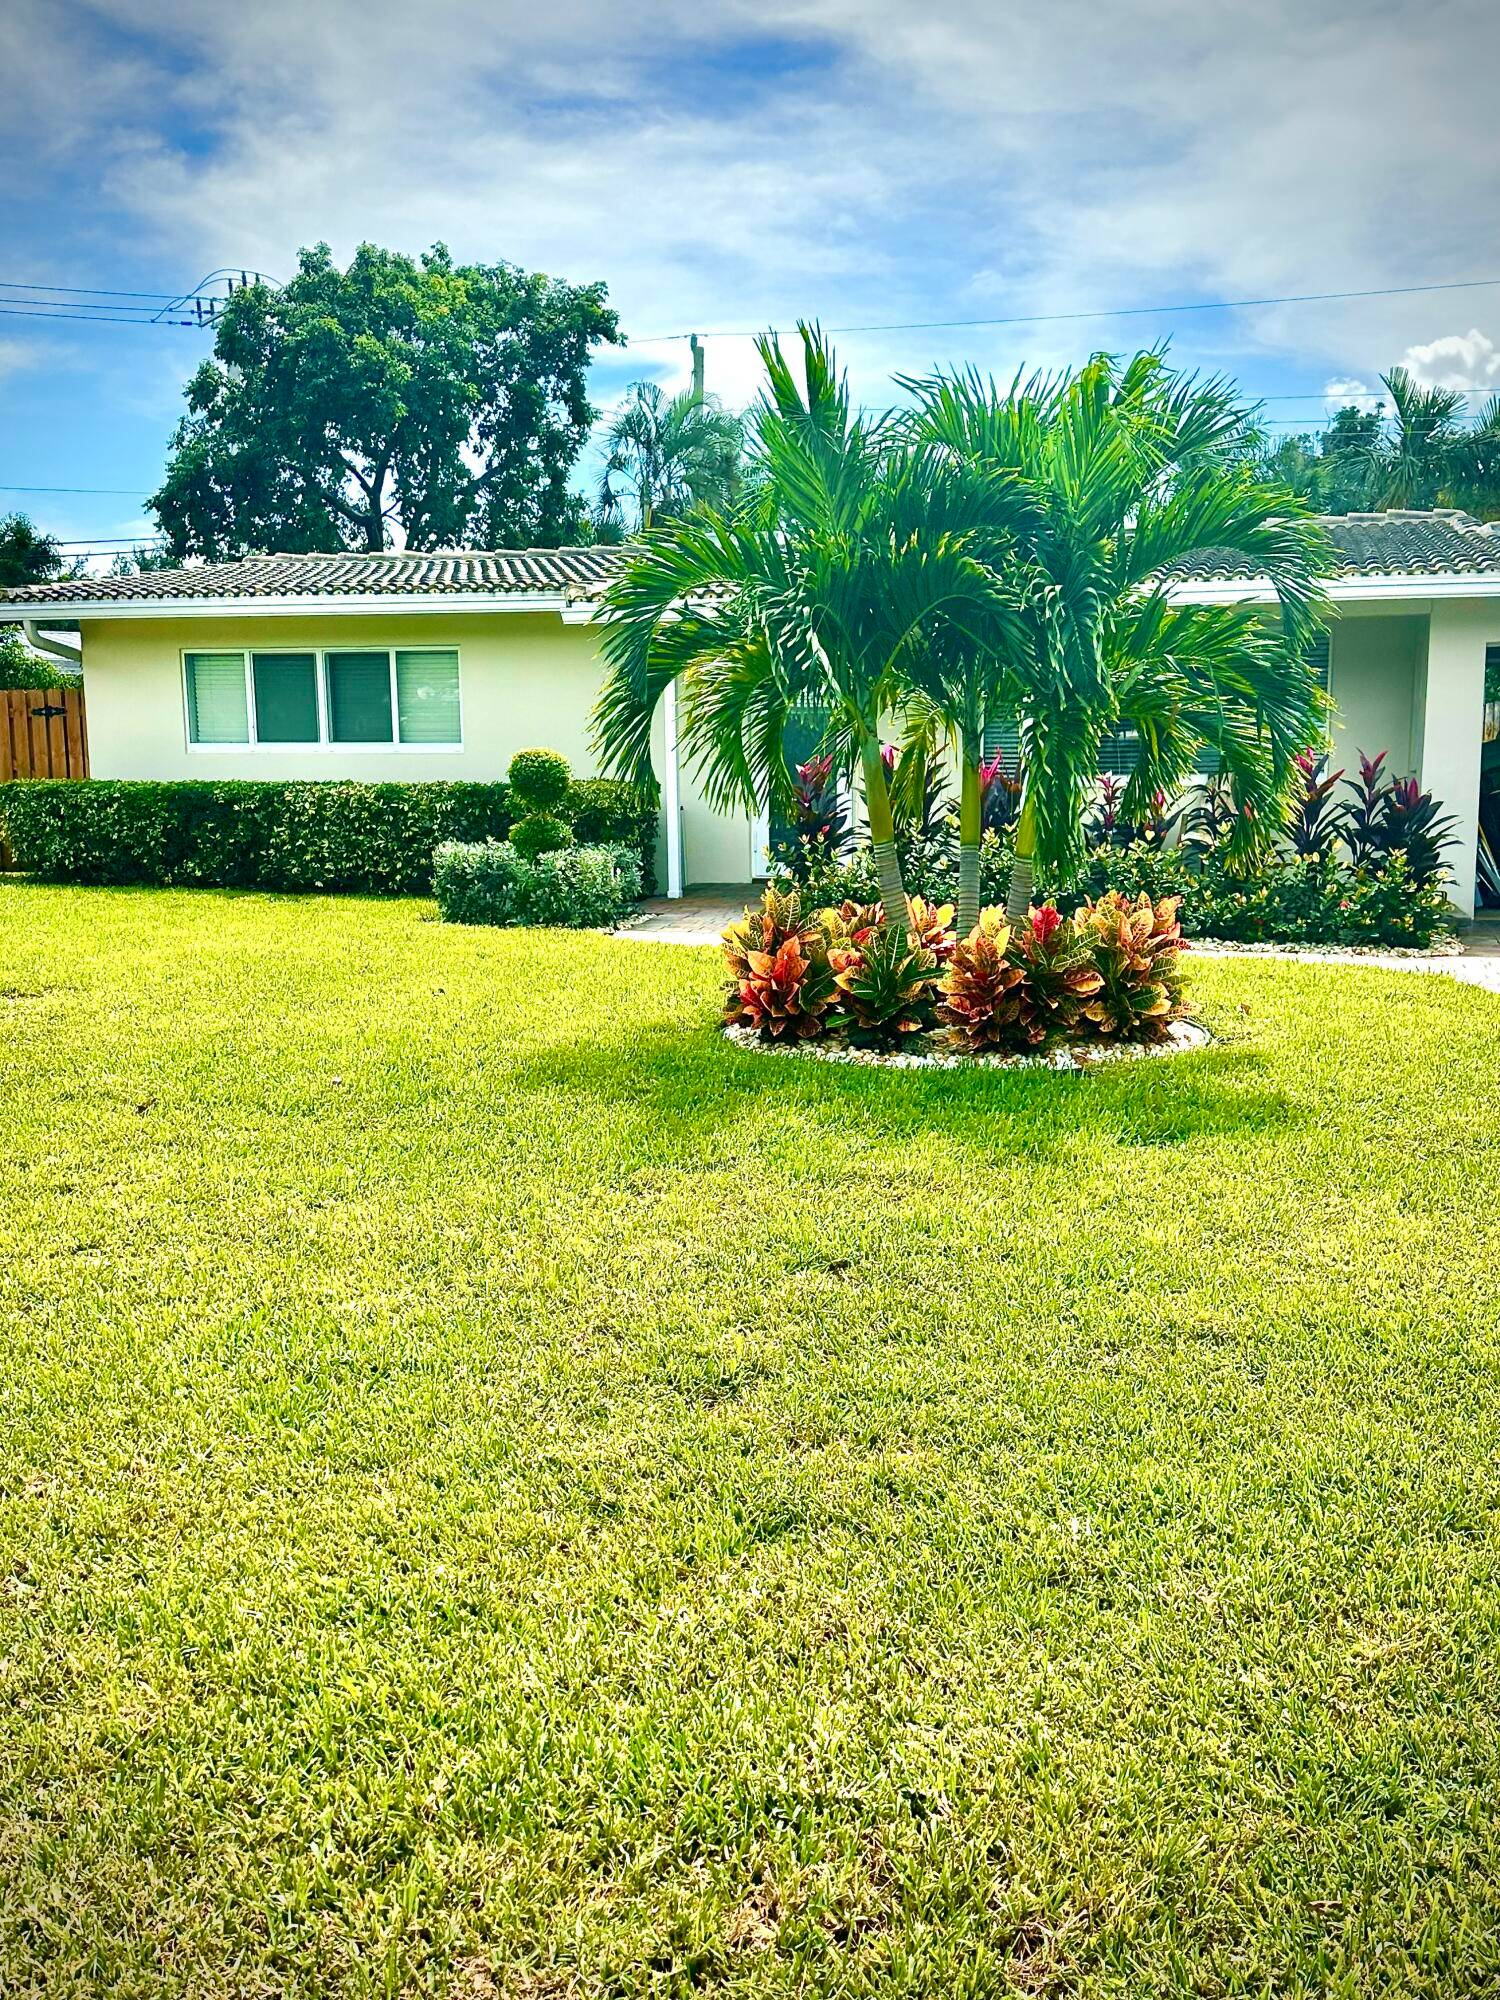 Welcome to this stellar 3 bedroom, 2 bathroom single family home located in the sun drenched district of Pompano Beach, FL.